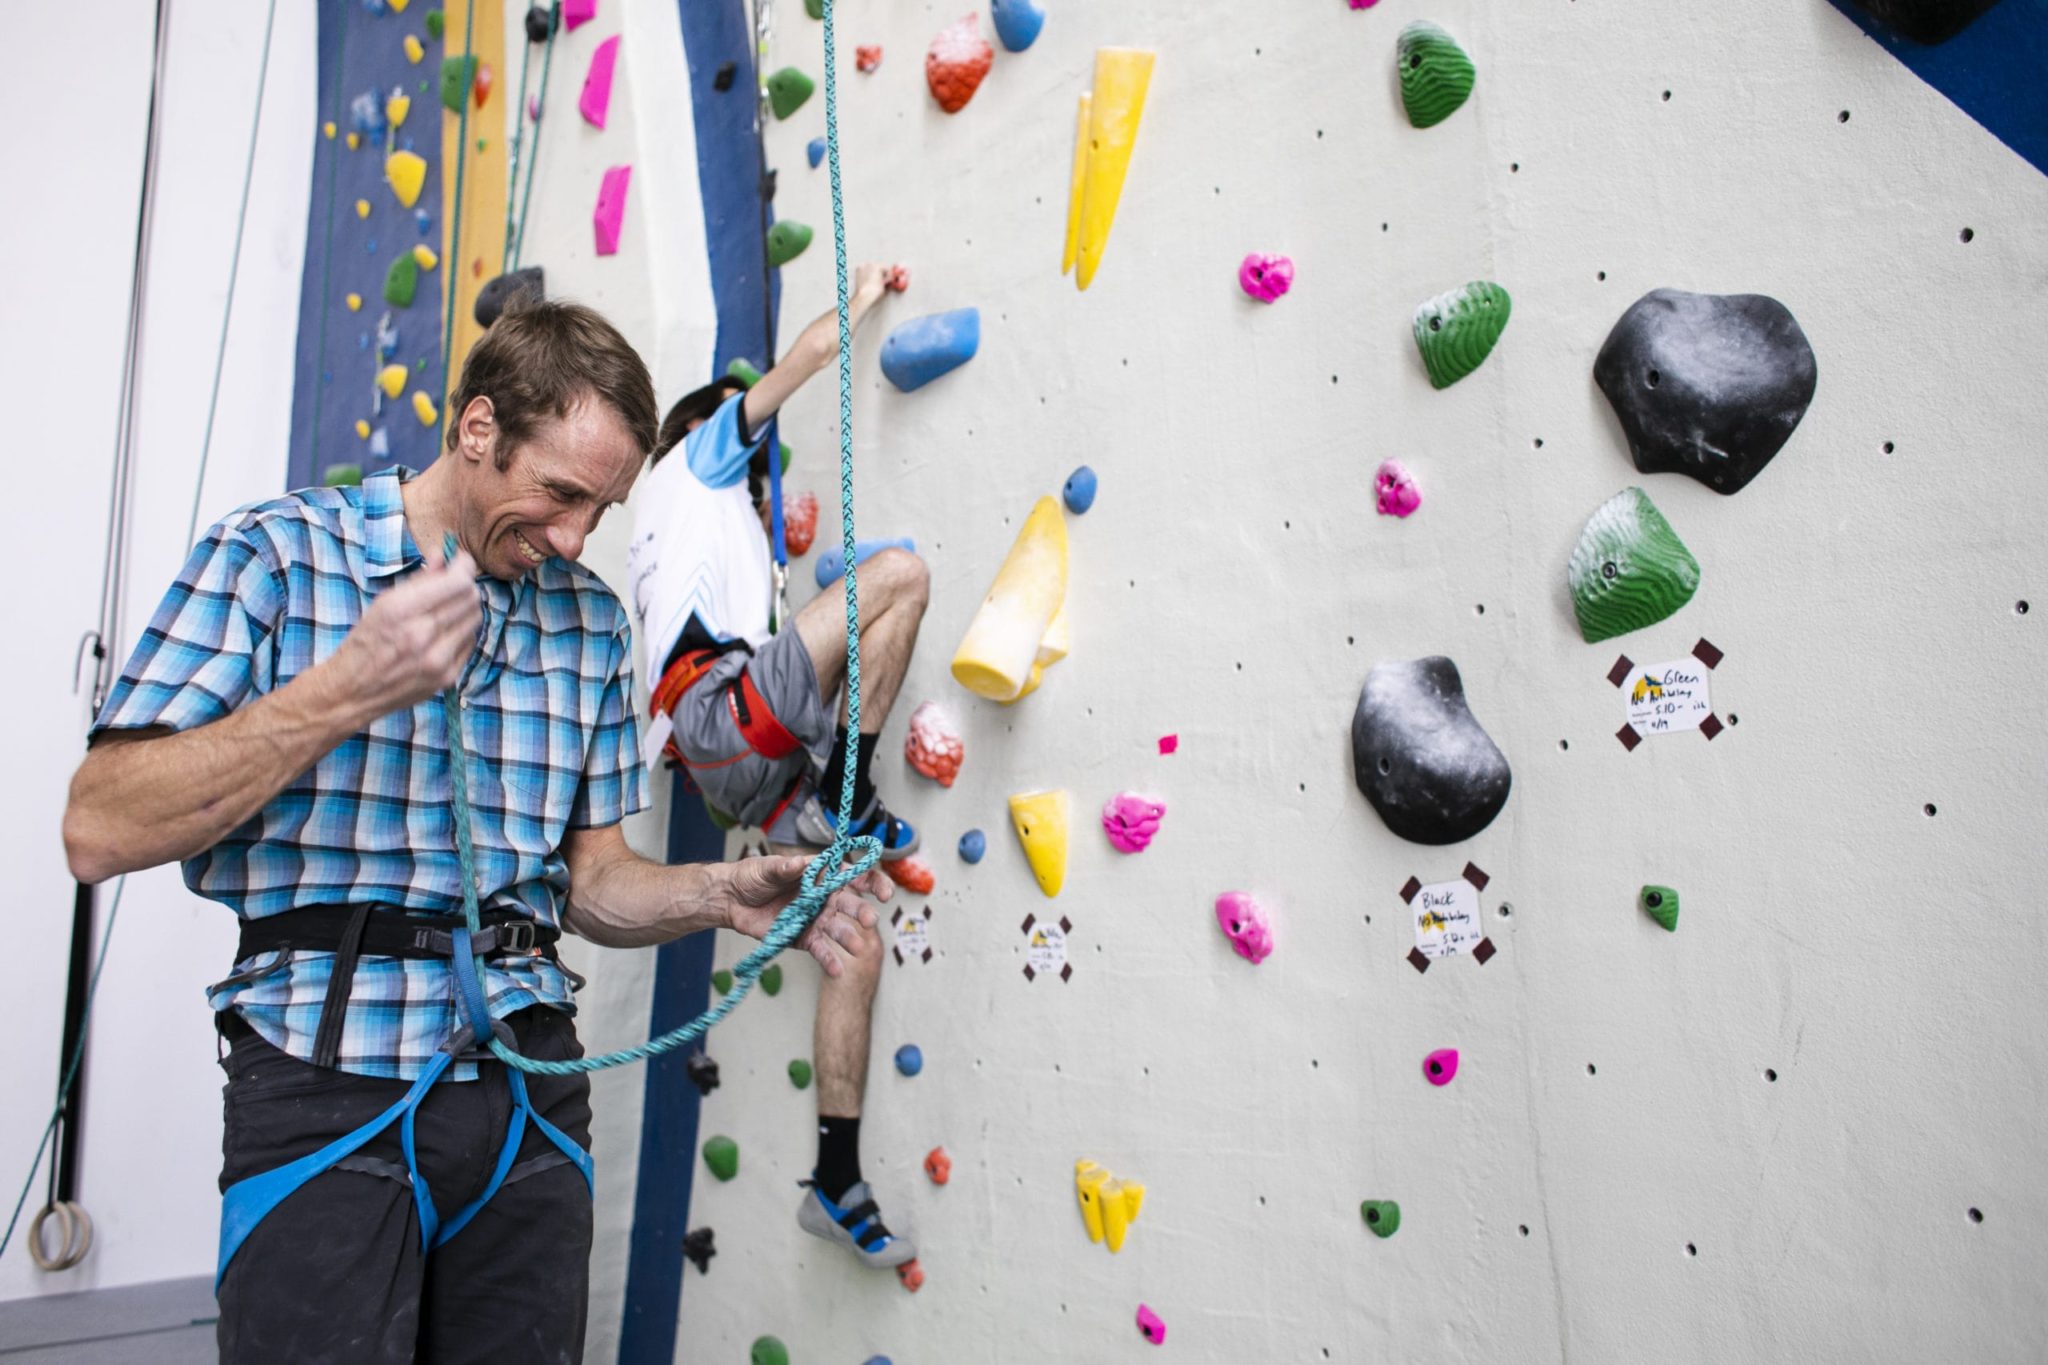 Patrons using climbing wall on Spring Valley campus.